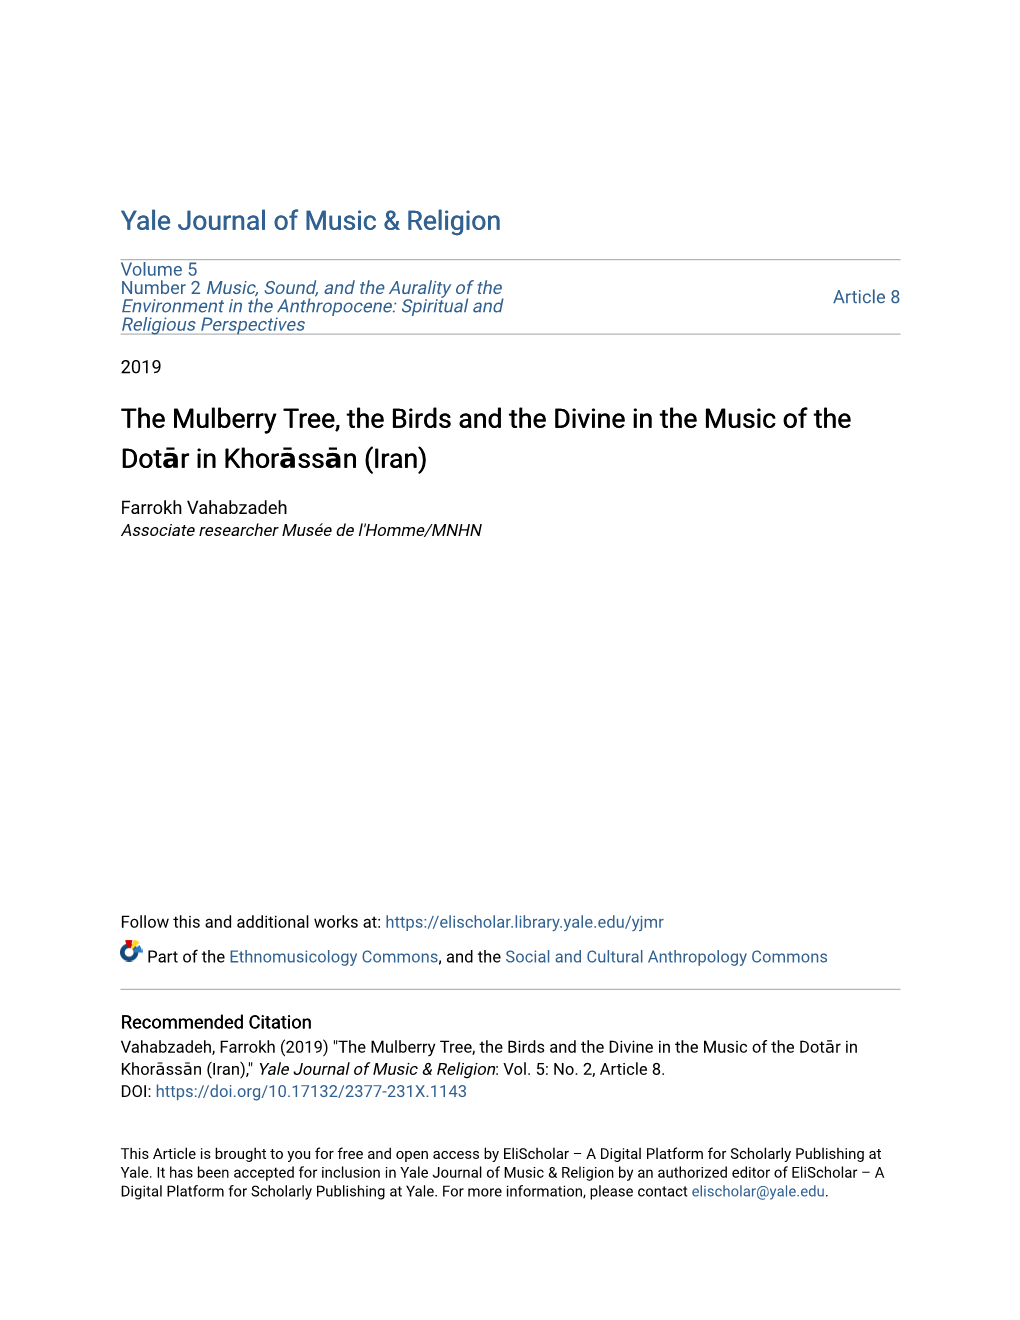 Yale Journal of Music & Religion the Mulberry Tree, the Birds and The